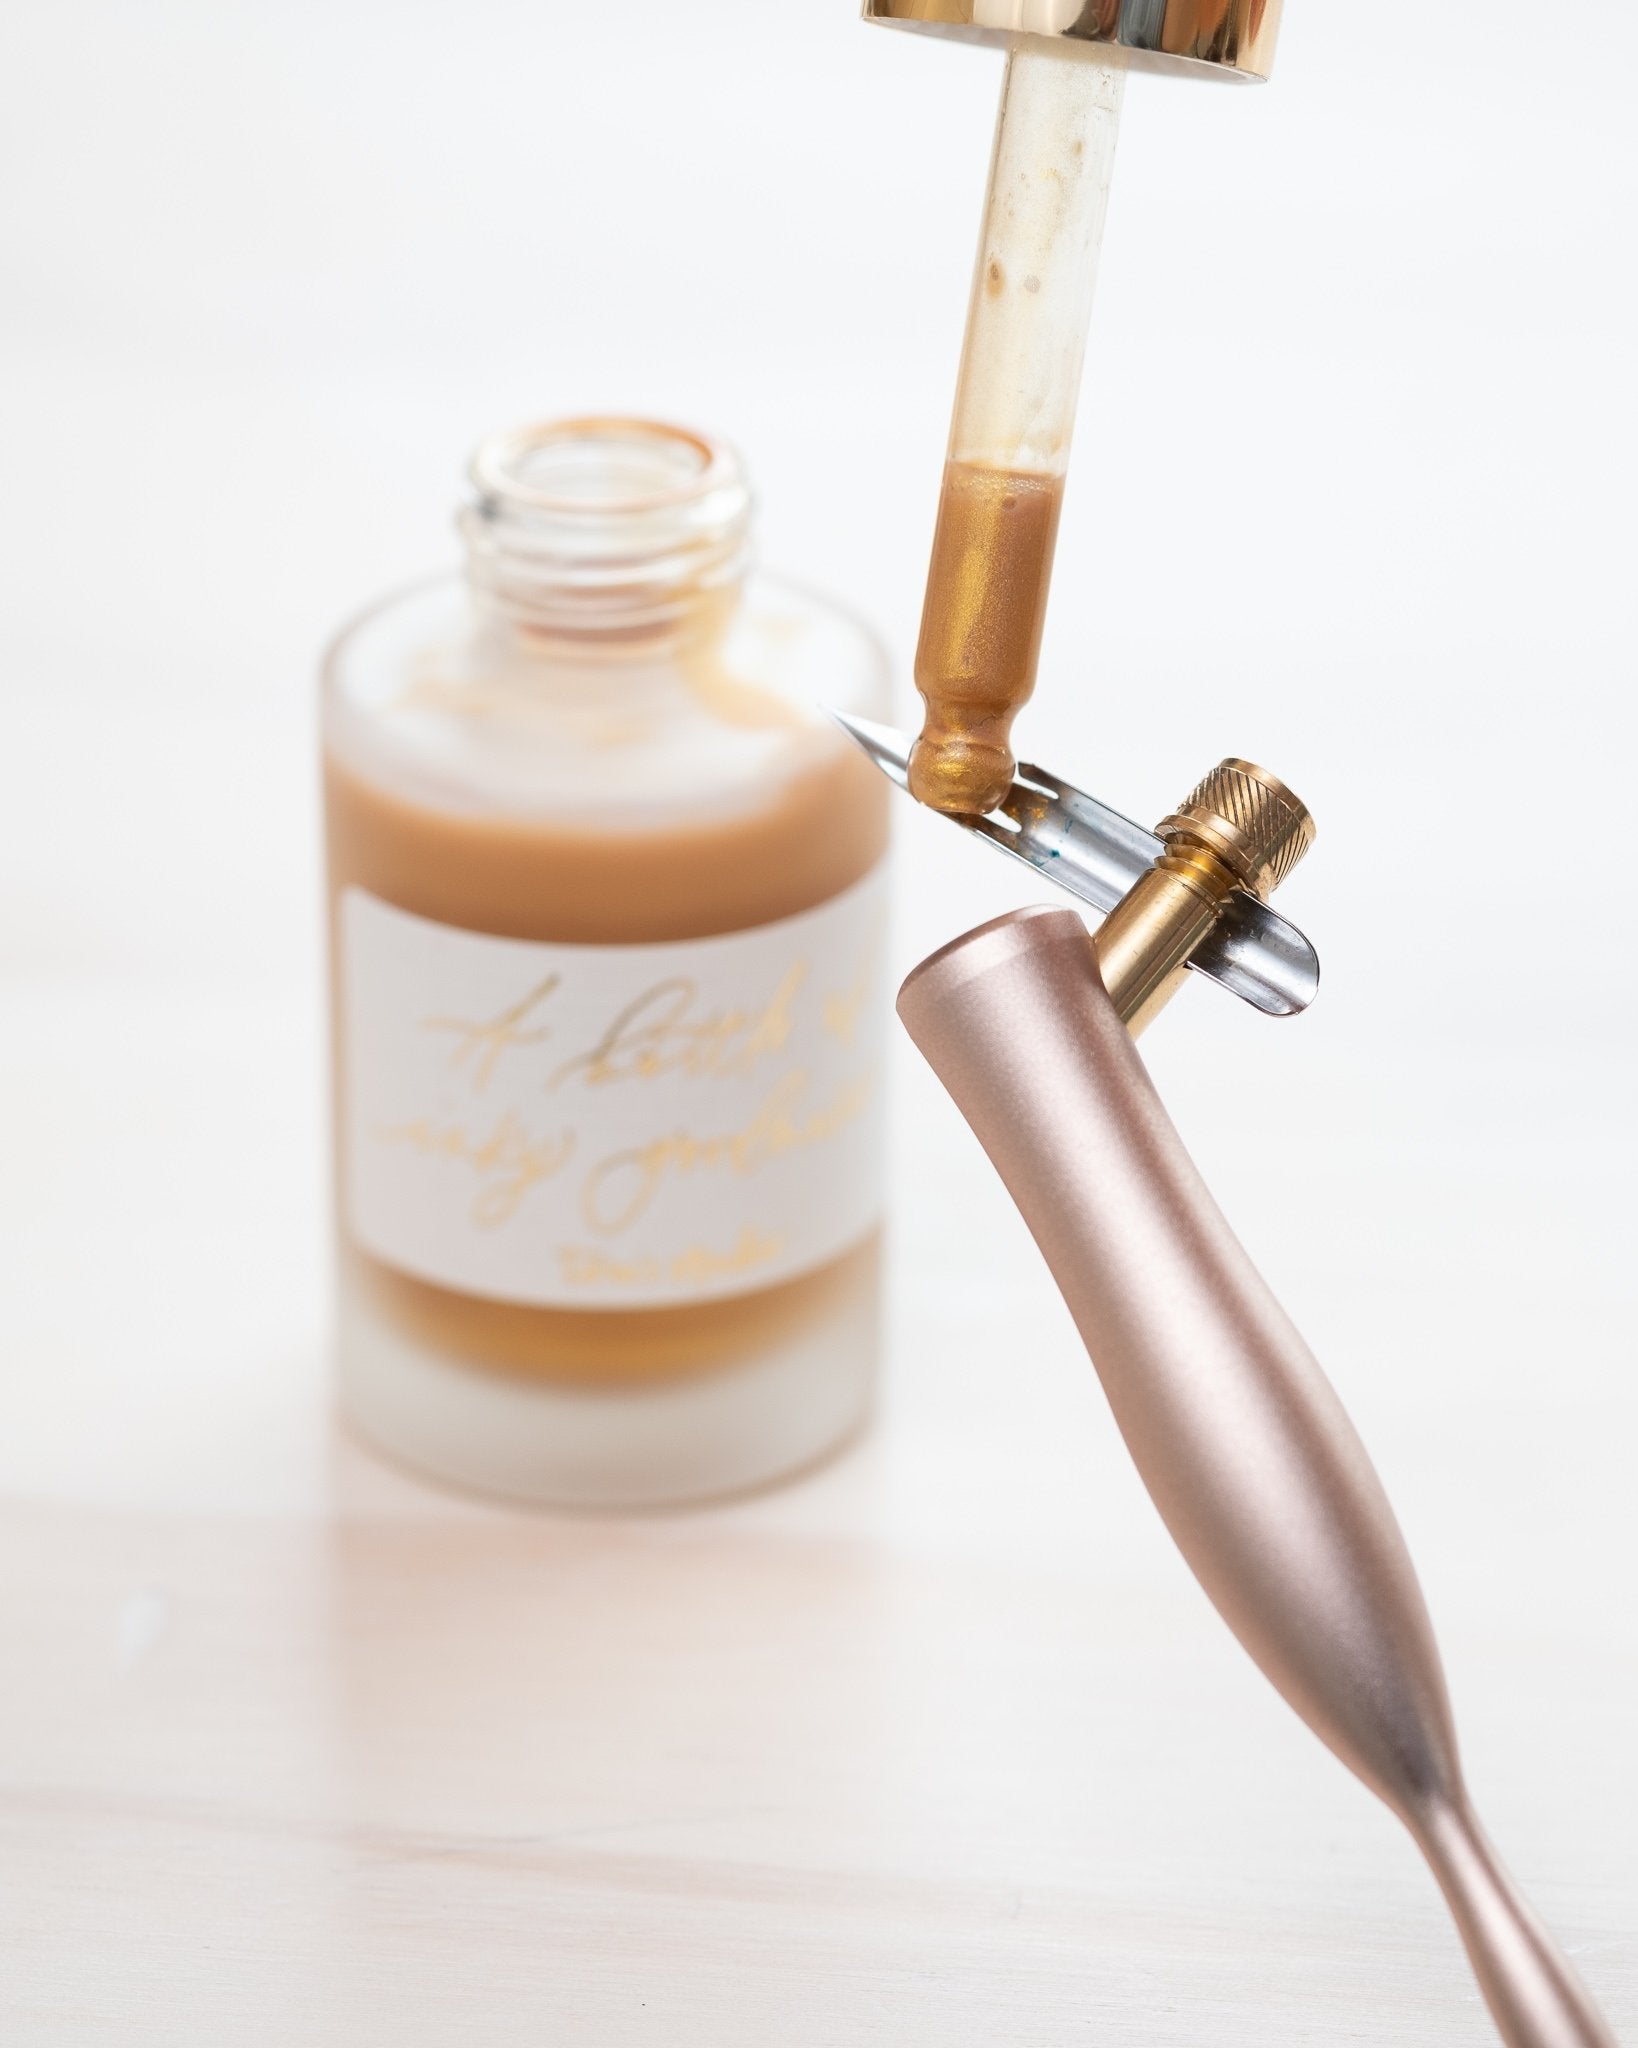 Walnut - Calligraphy Ink using the built in pipette to ink a calligraphy nib